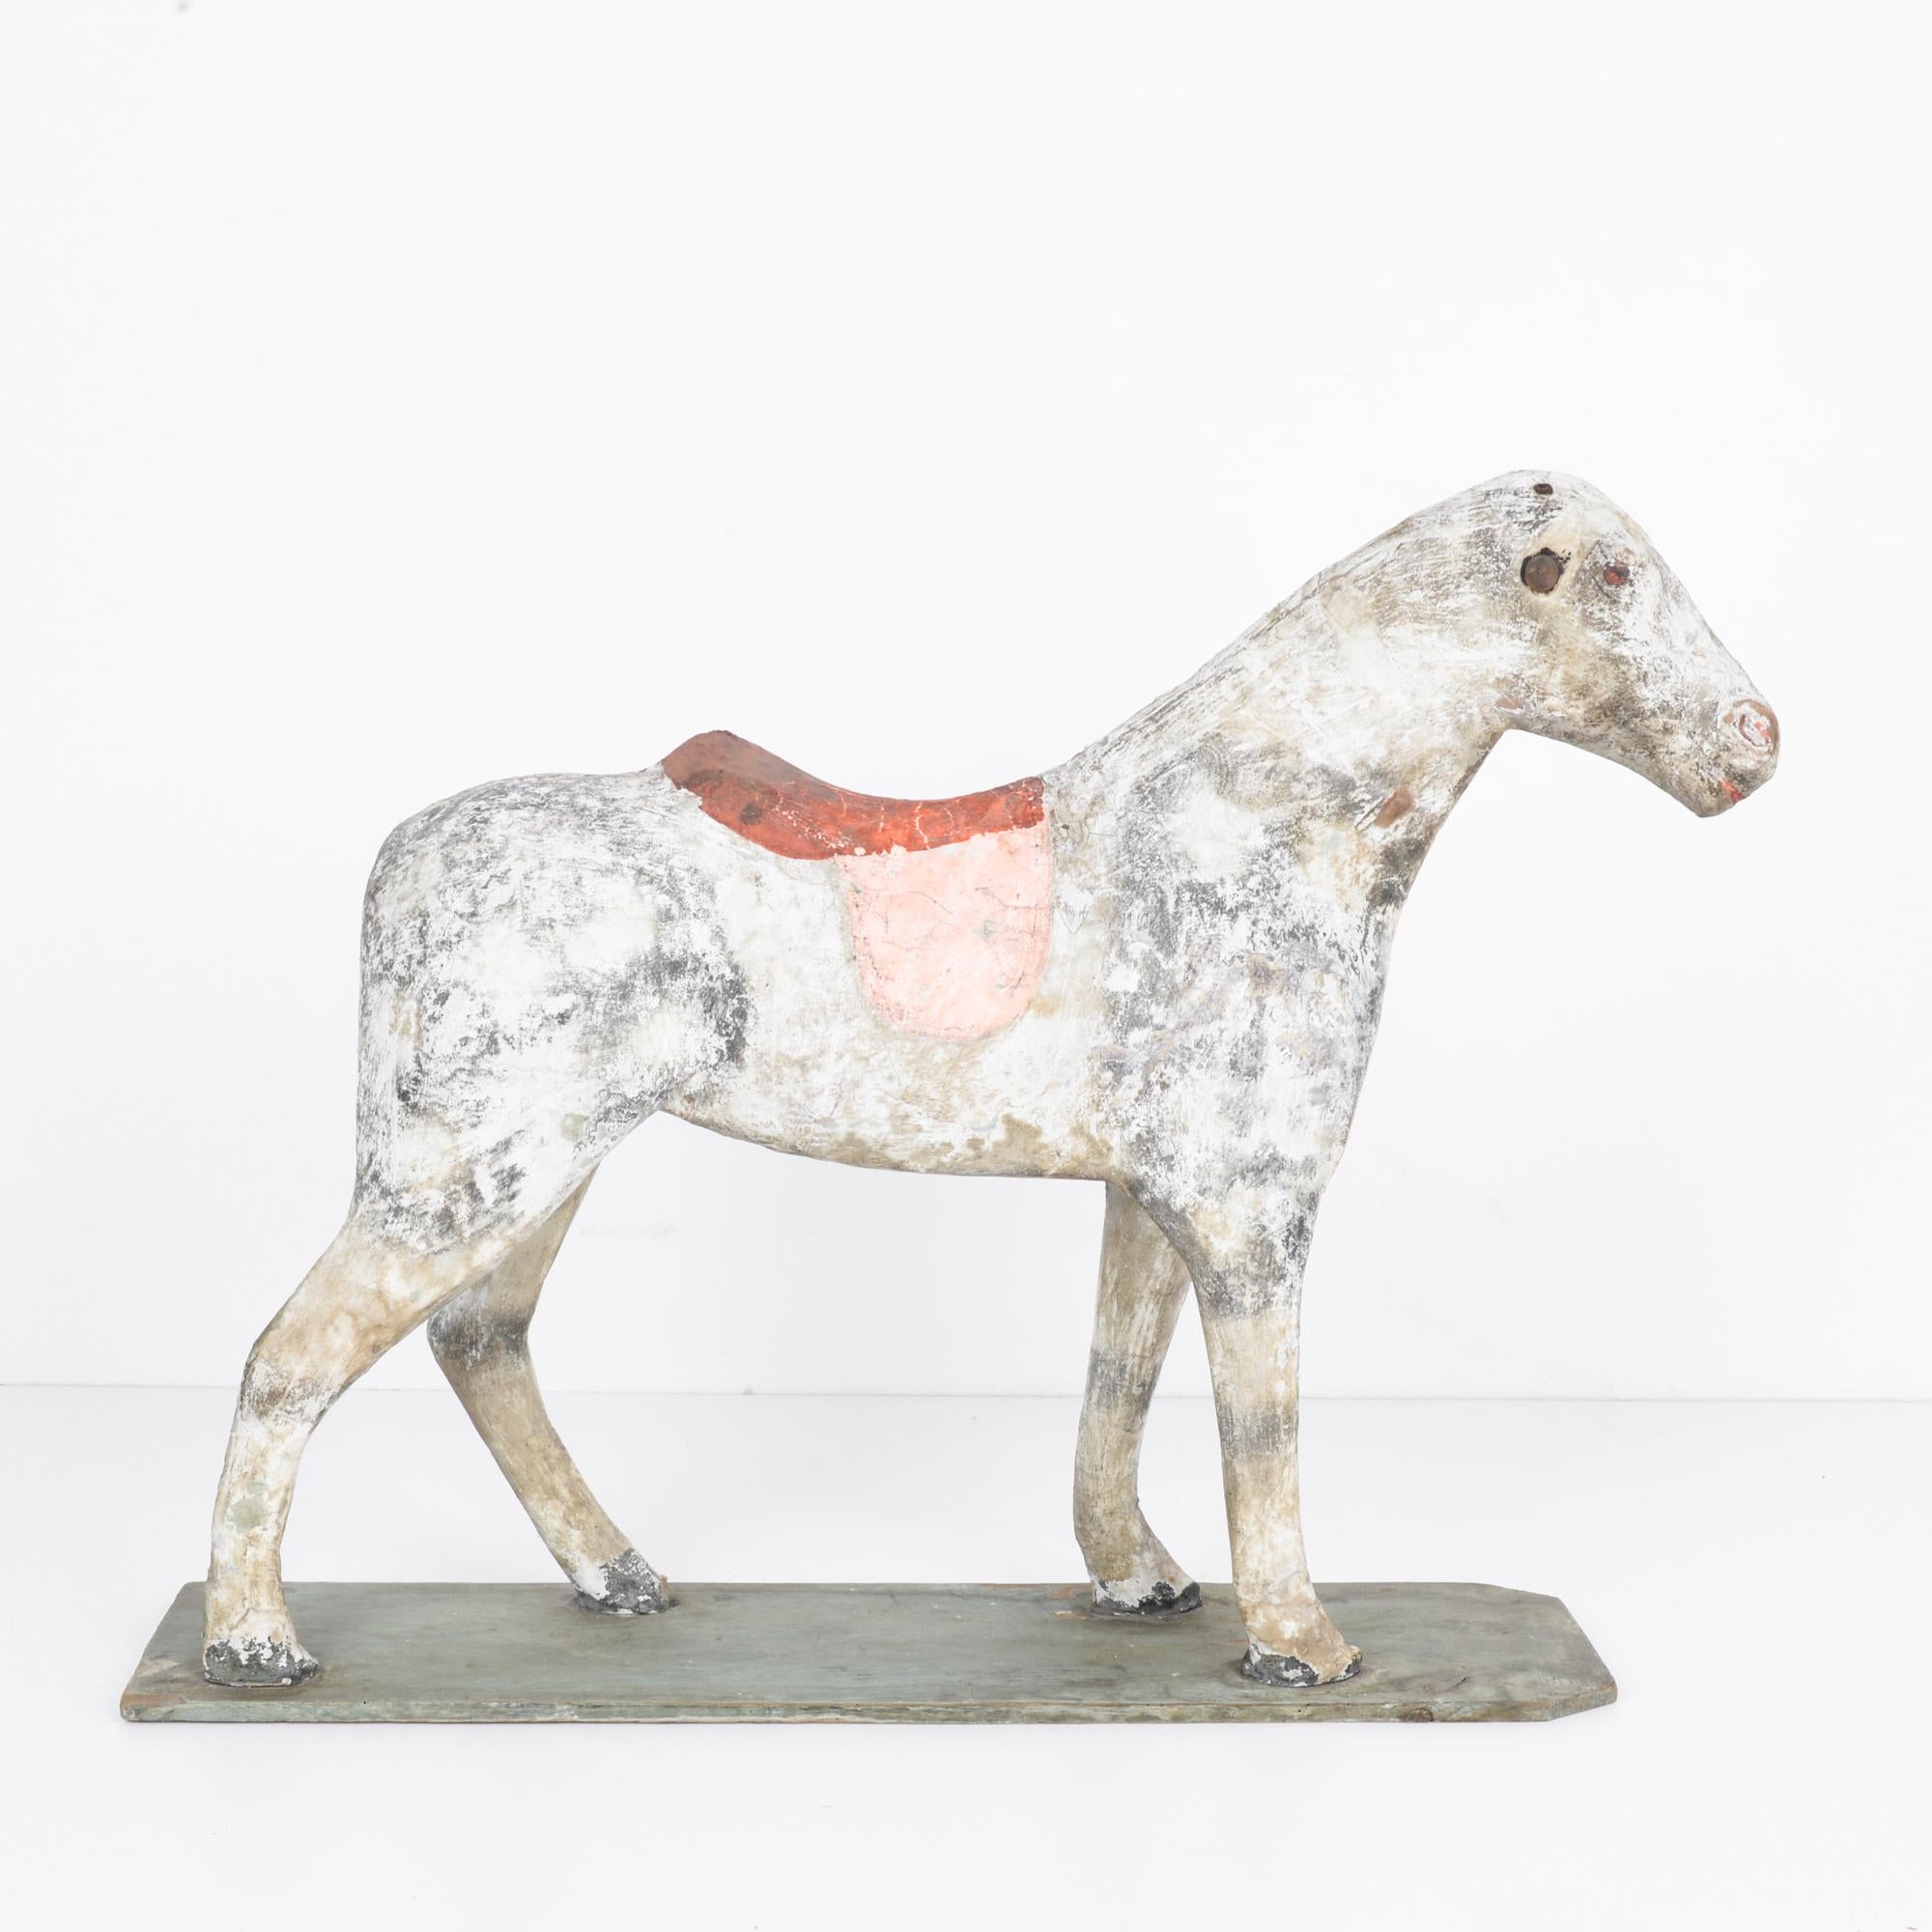 A wooden horse from France, circa 1900. Originally painted white, the finish has weathered into a striking patina, scuffed and textured, with shades of pigeon gray and sepia. Red-painted accents — the saddle, mouth and nostrils — create a bright